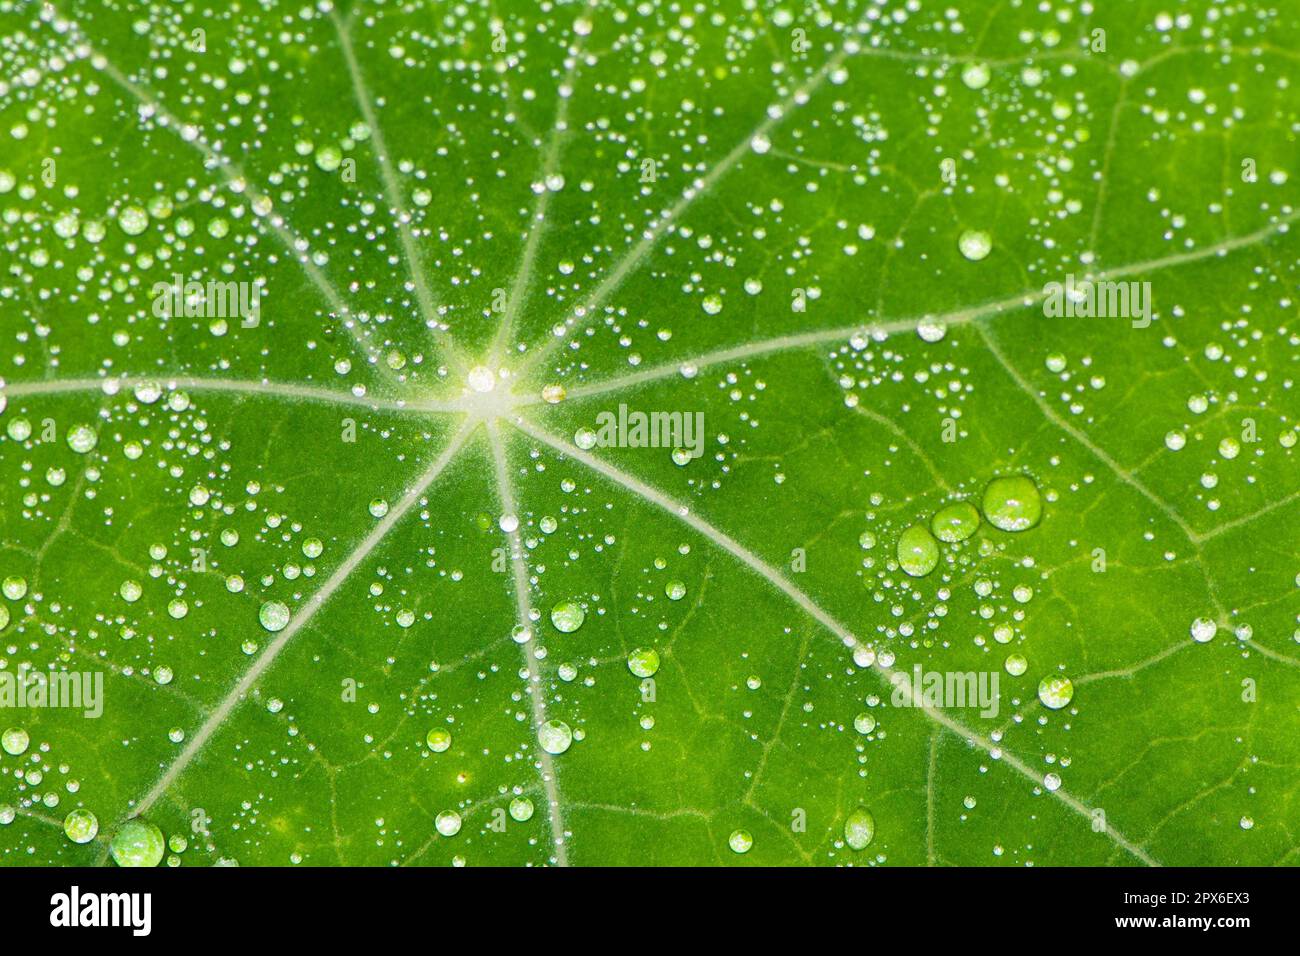 Background with a green leaf full of water drops Stock Photo